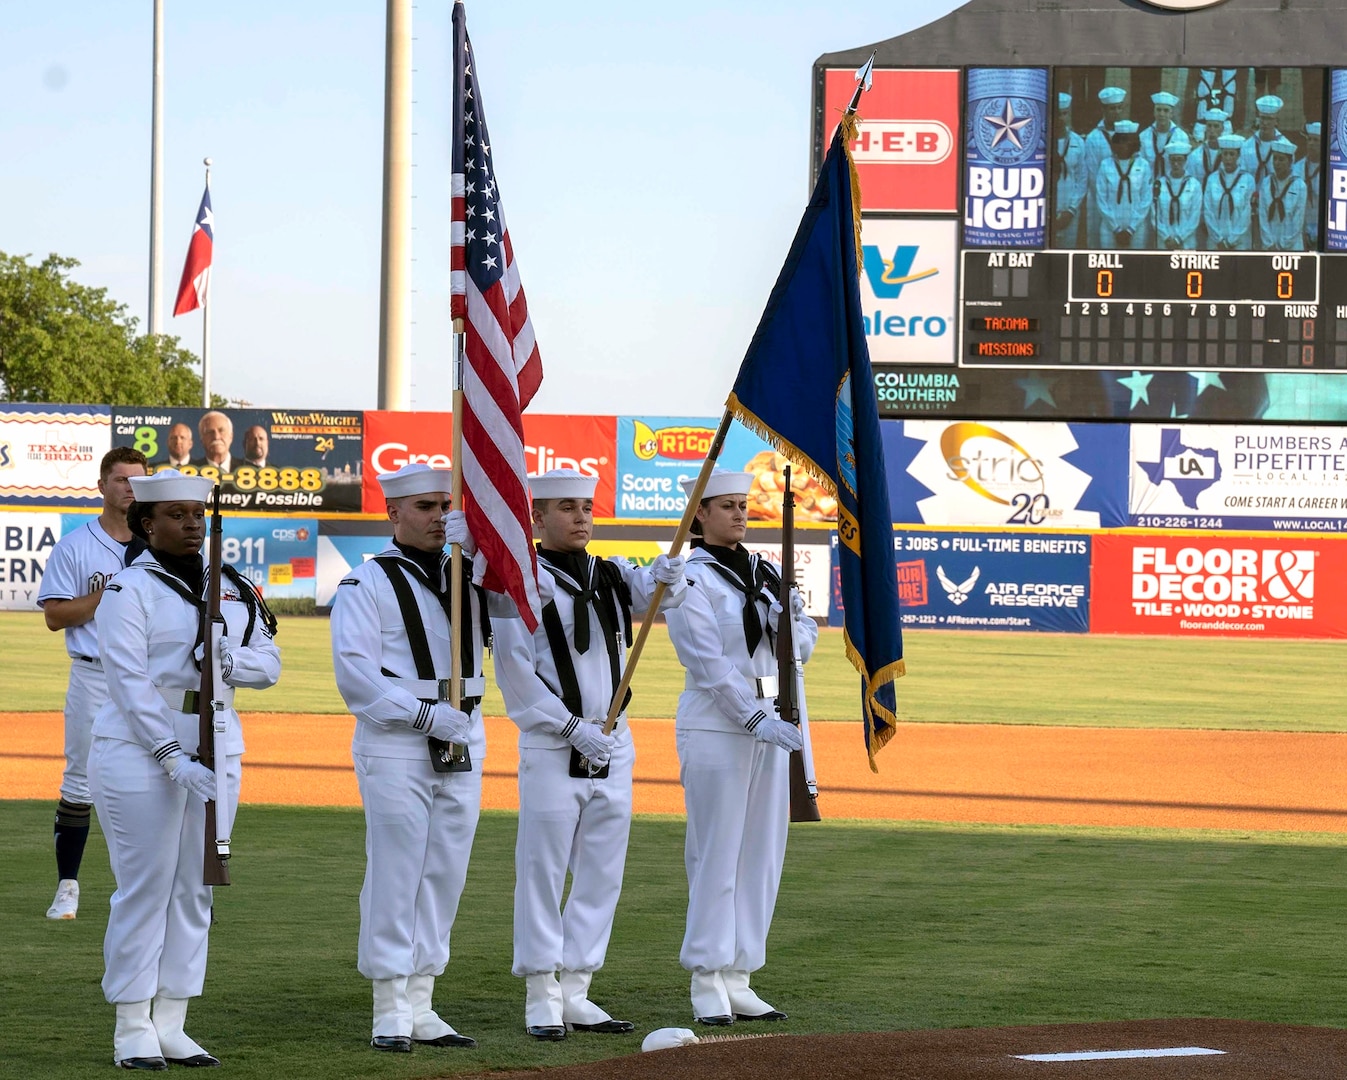 Navy Information Operations Command Texas presents the colors during a San Antonio Missions baseball game in honor of military appreciation night June 12.